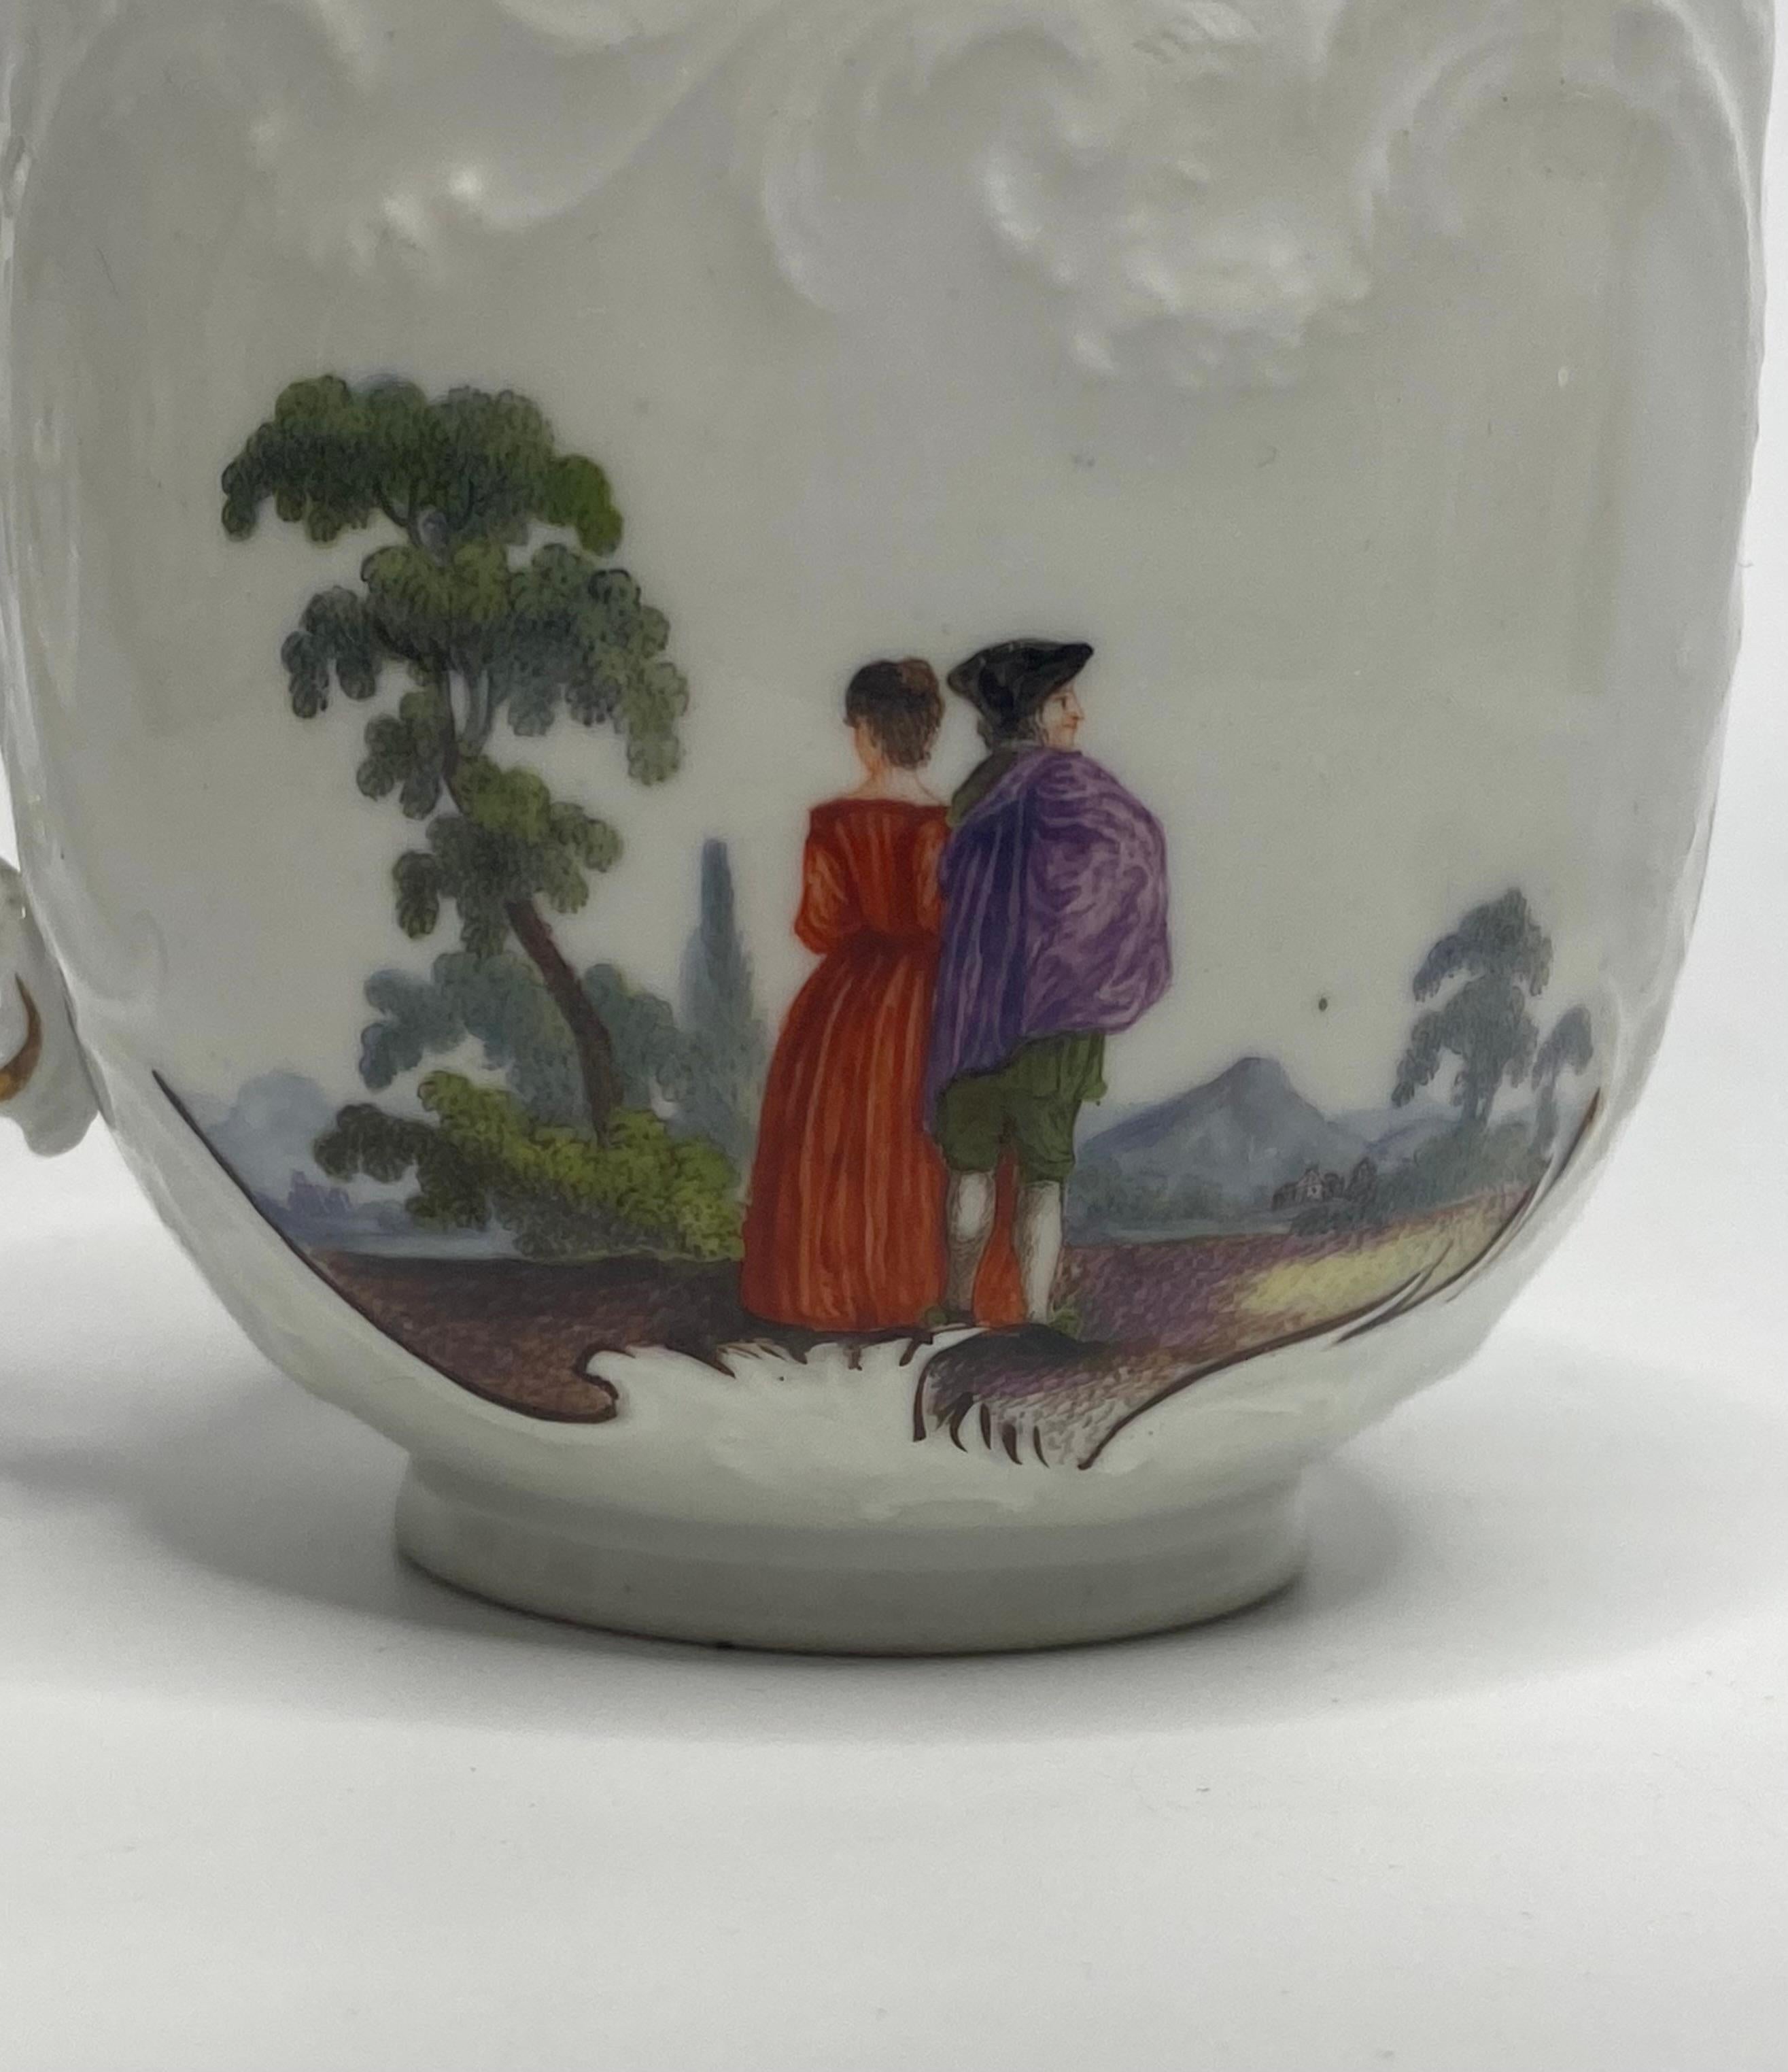 Meissen porcelain cup and saucer, c. 1740. 6